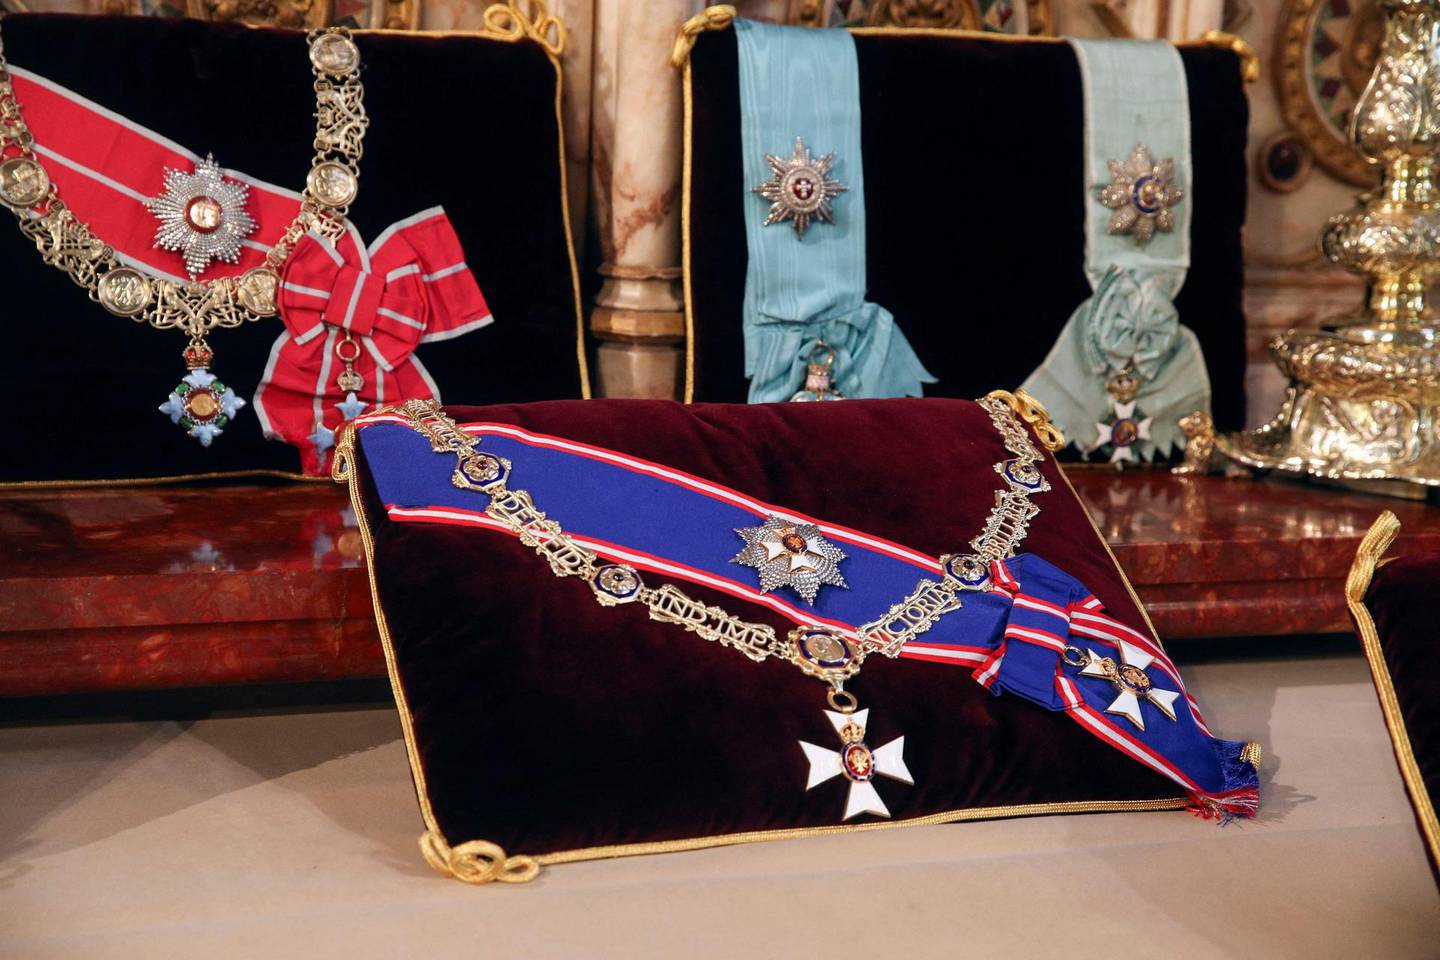 Insignia belonging to Britain's Prince Philip, Duke of Edinburgh, the Royal Victorian Order Collar and Badge, and the Royal Victorian Order Breast Star and Badge (front) and The Order of the Elephant (Denmark), and the Order of the Redeemer (Greece), are seen arranged on the altar in St George's Chapel in Windsor Castle, Windsor, west of London, on April 16, 2021 on the eve of the duke's funeral.  Queen Elizabeth II bids a final farewell to her late husband Prince Philip, at a funeral restricted by coronavirus rules but reflecting his long life of military and public service. Prince Philip died on April 9 at the age of 99. / AFP / POOL / Steve Parsons
